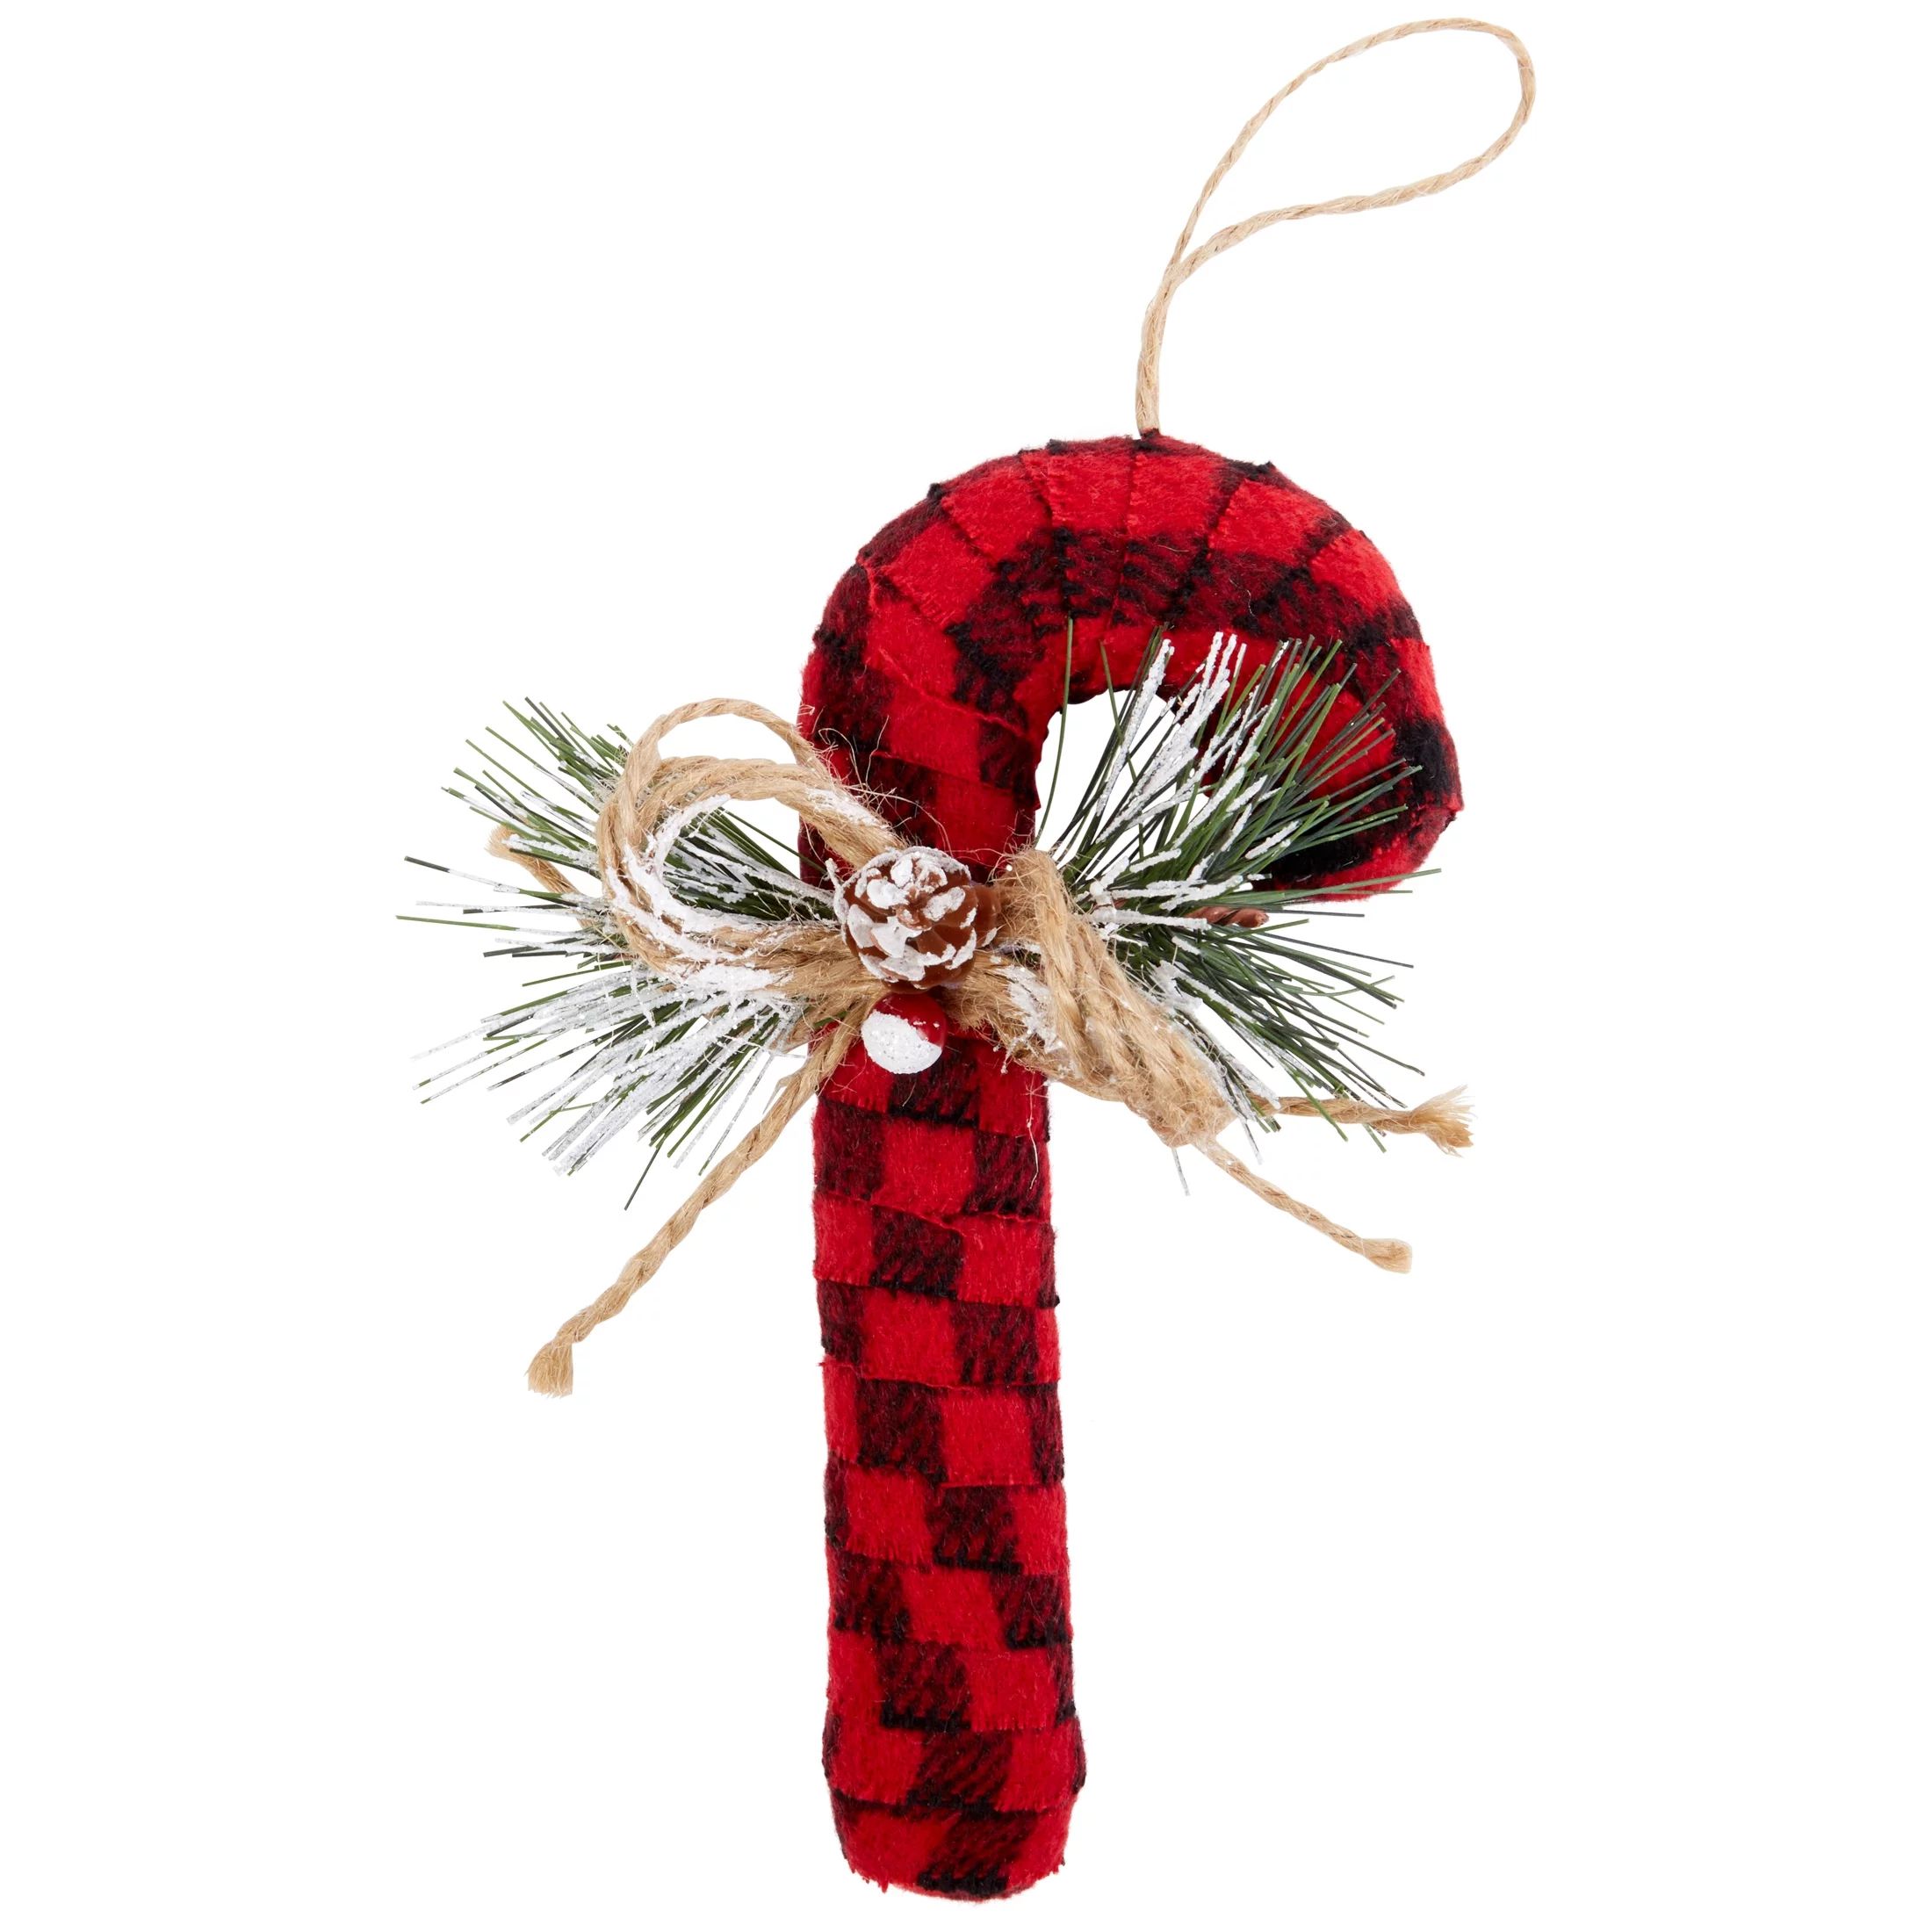 Fabric Balls and Candy cane Christmas Ornaments, by Holiday Time | Walmart (US)